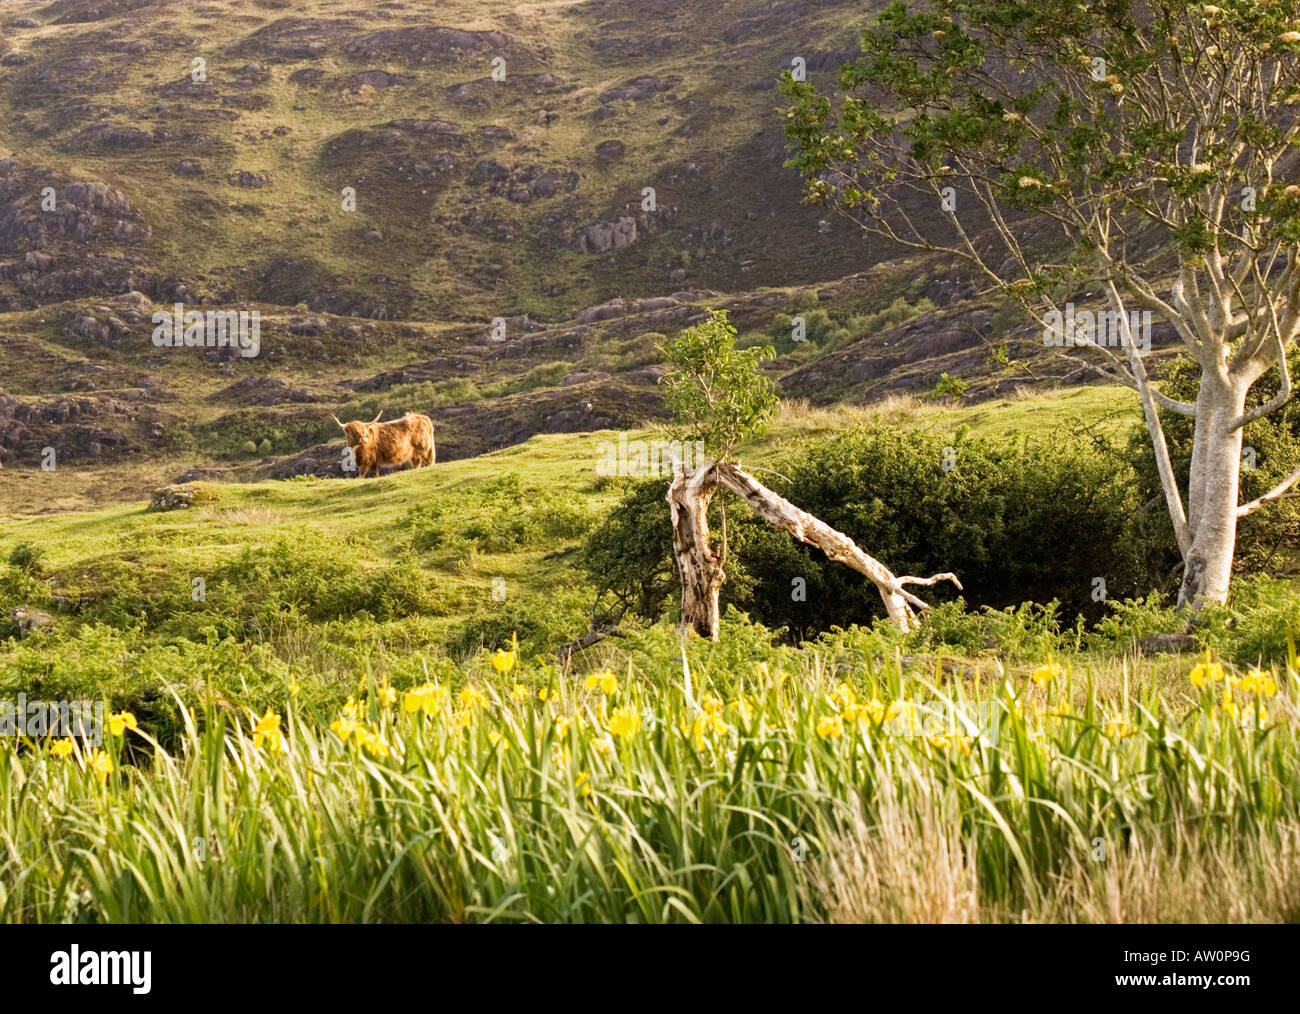 Highland cow standing on hillside in Scotland Stock Photo